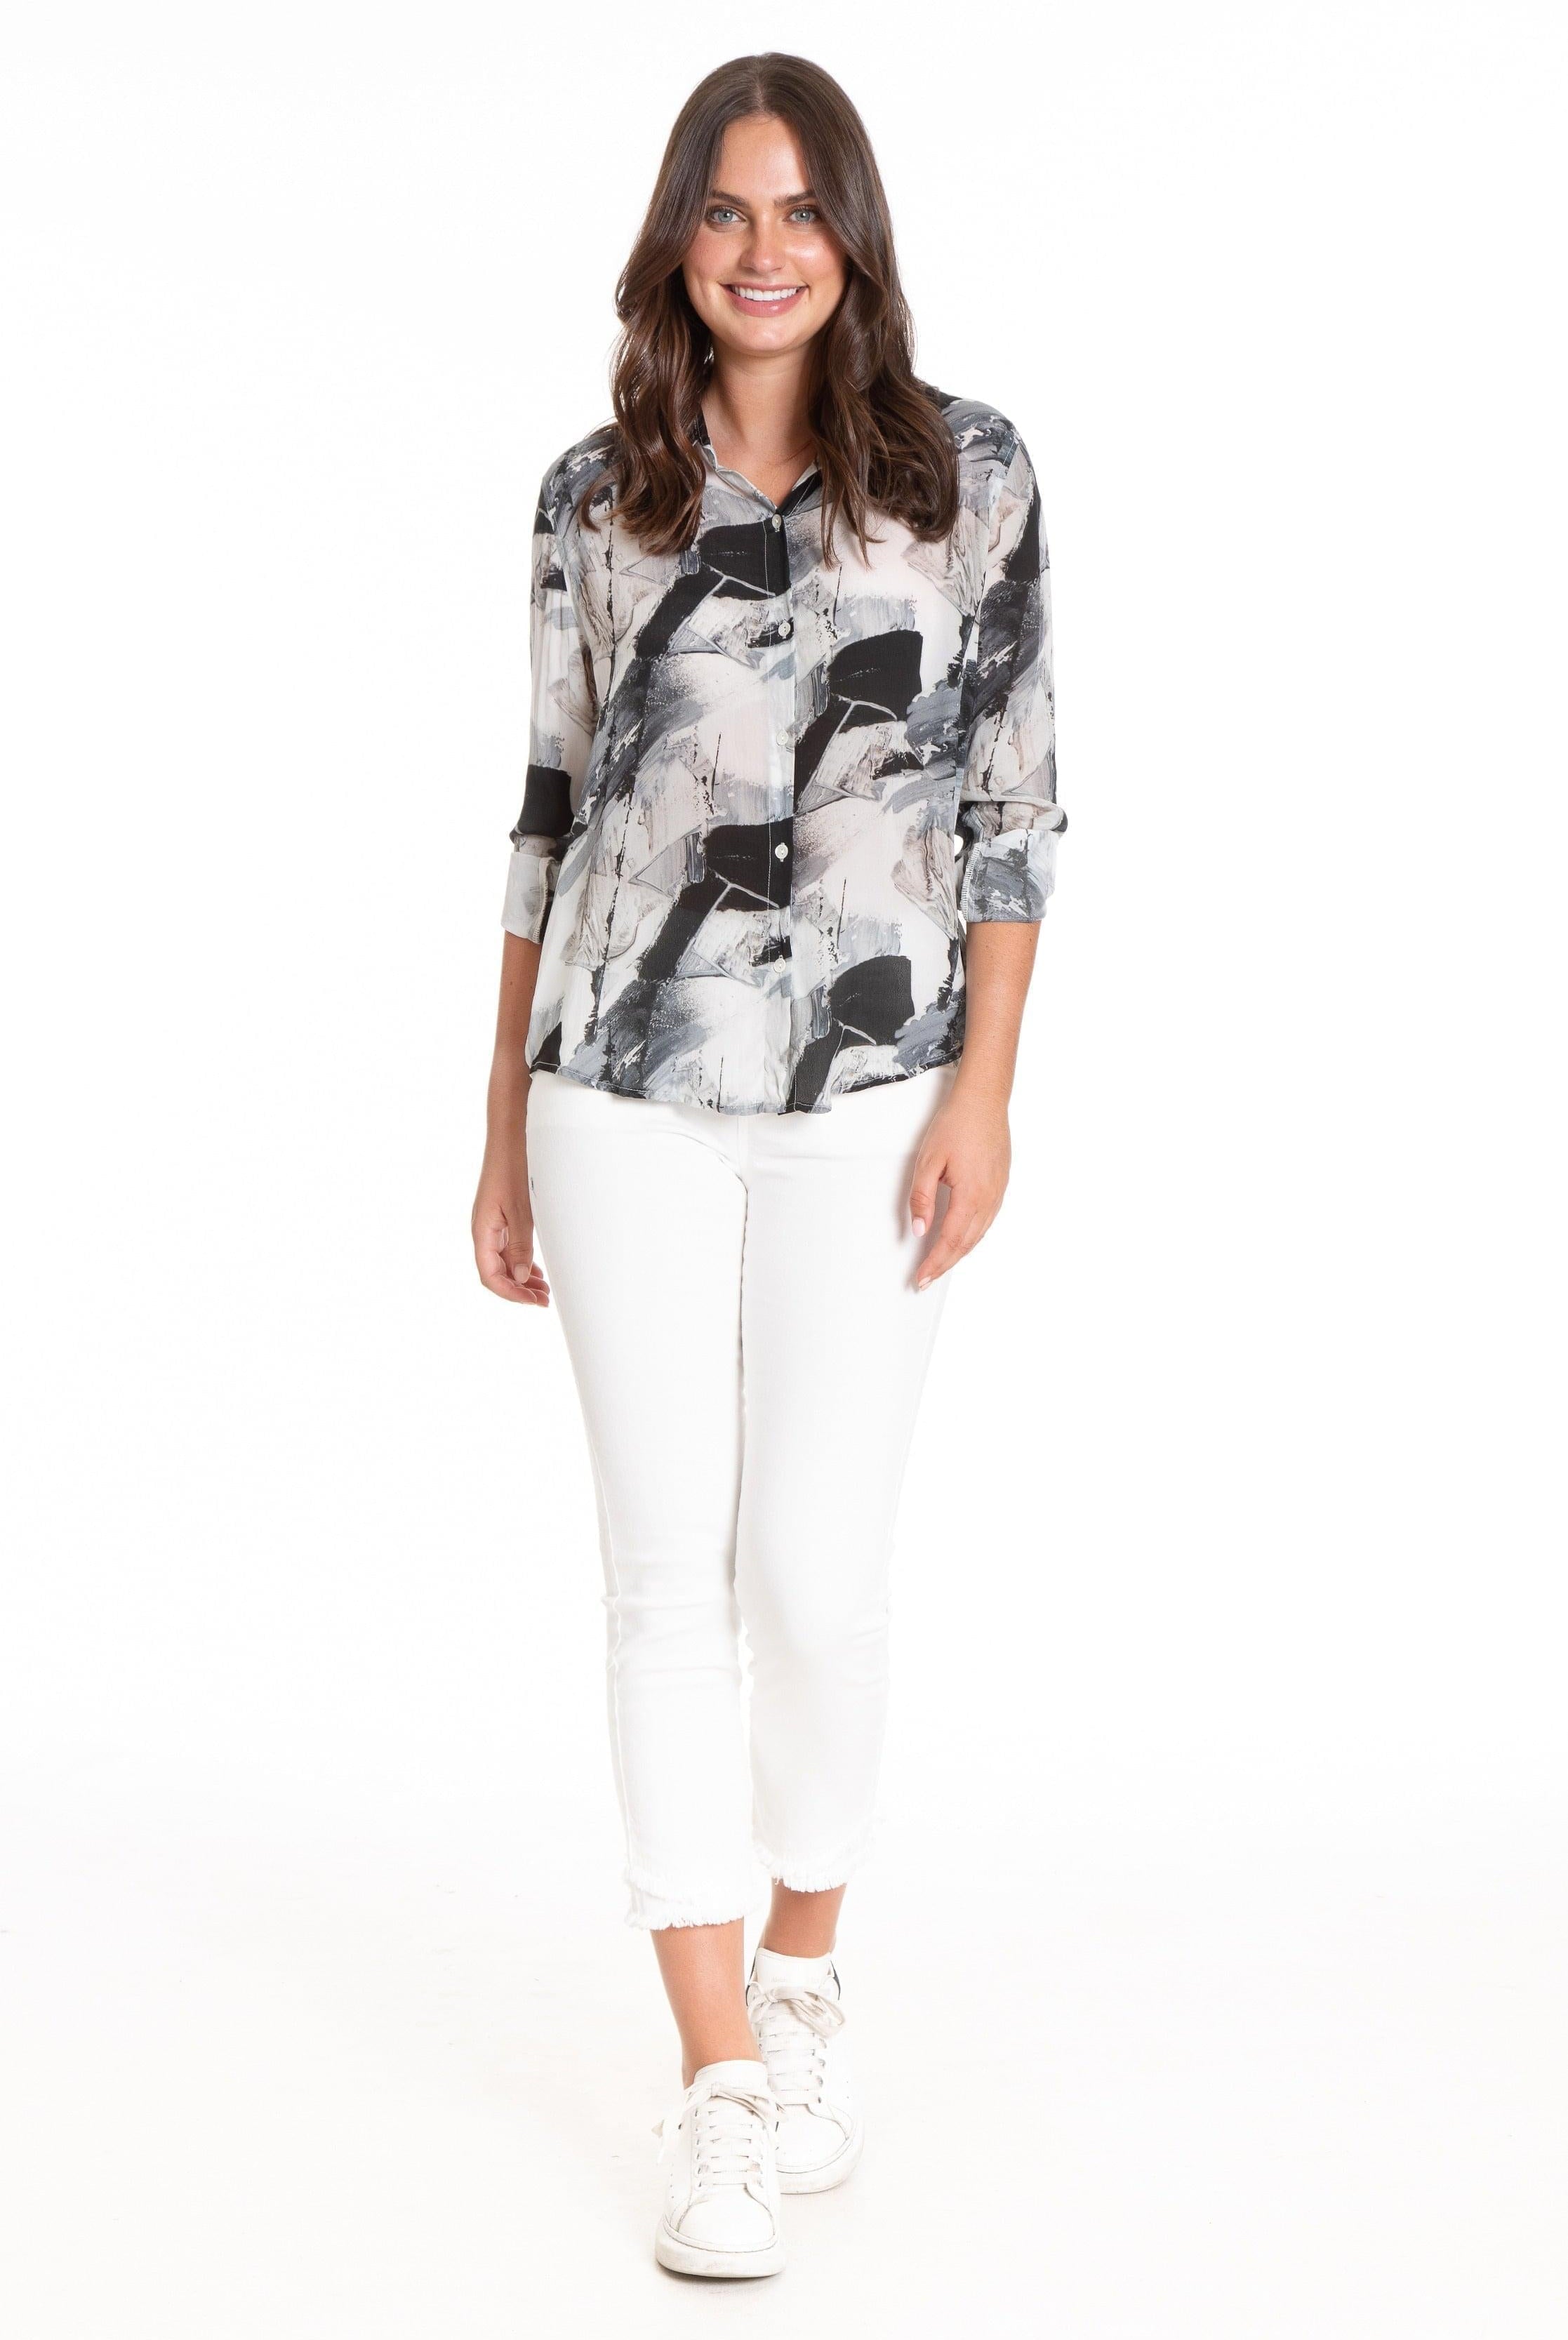 Black & White Abstract - Button-up with Roll-up Sleeve Full APNY